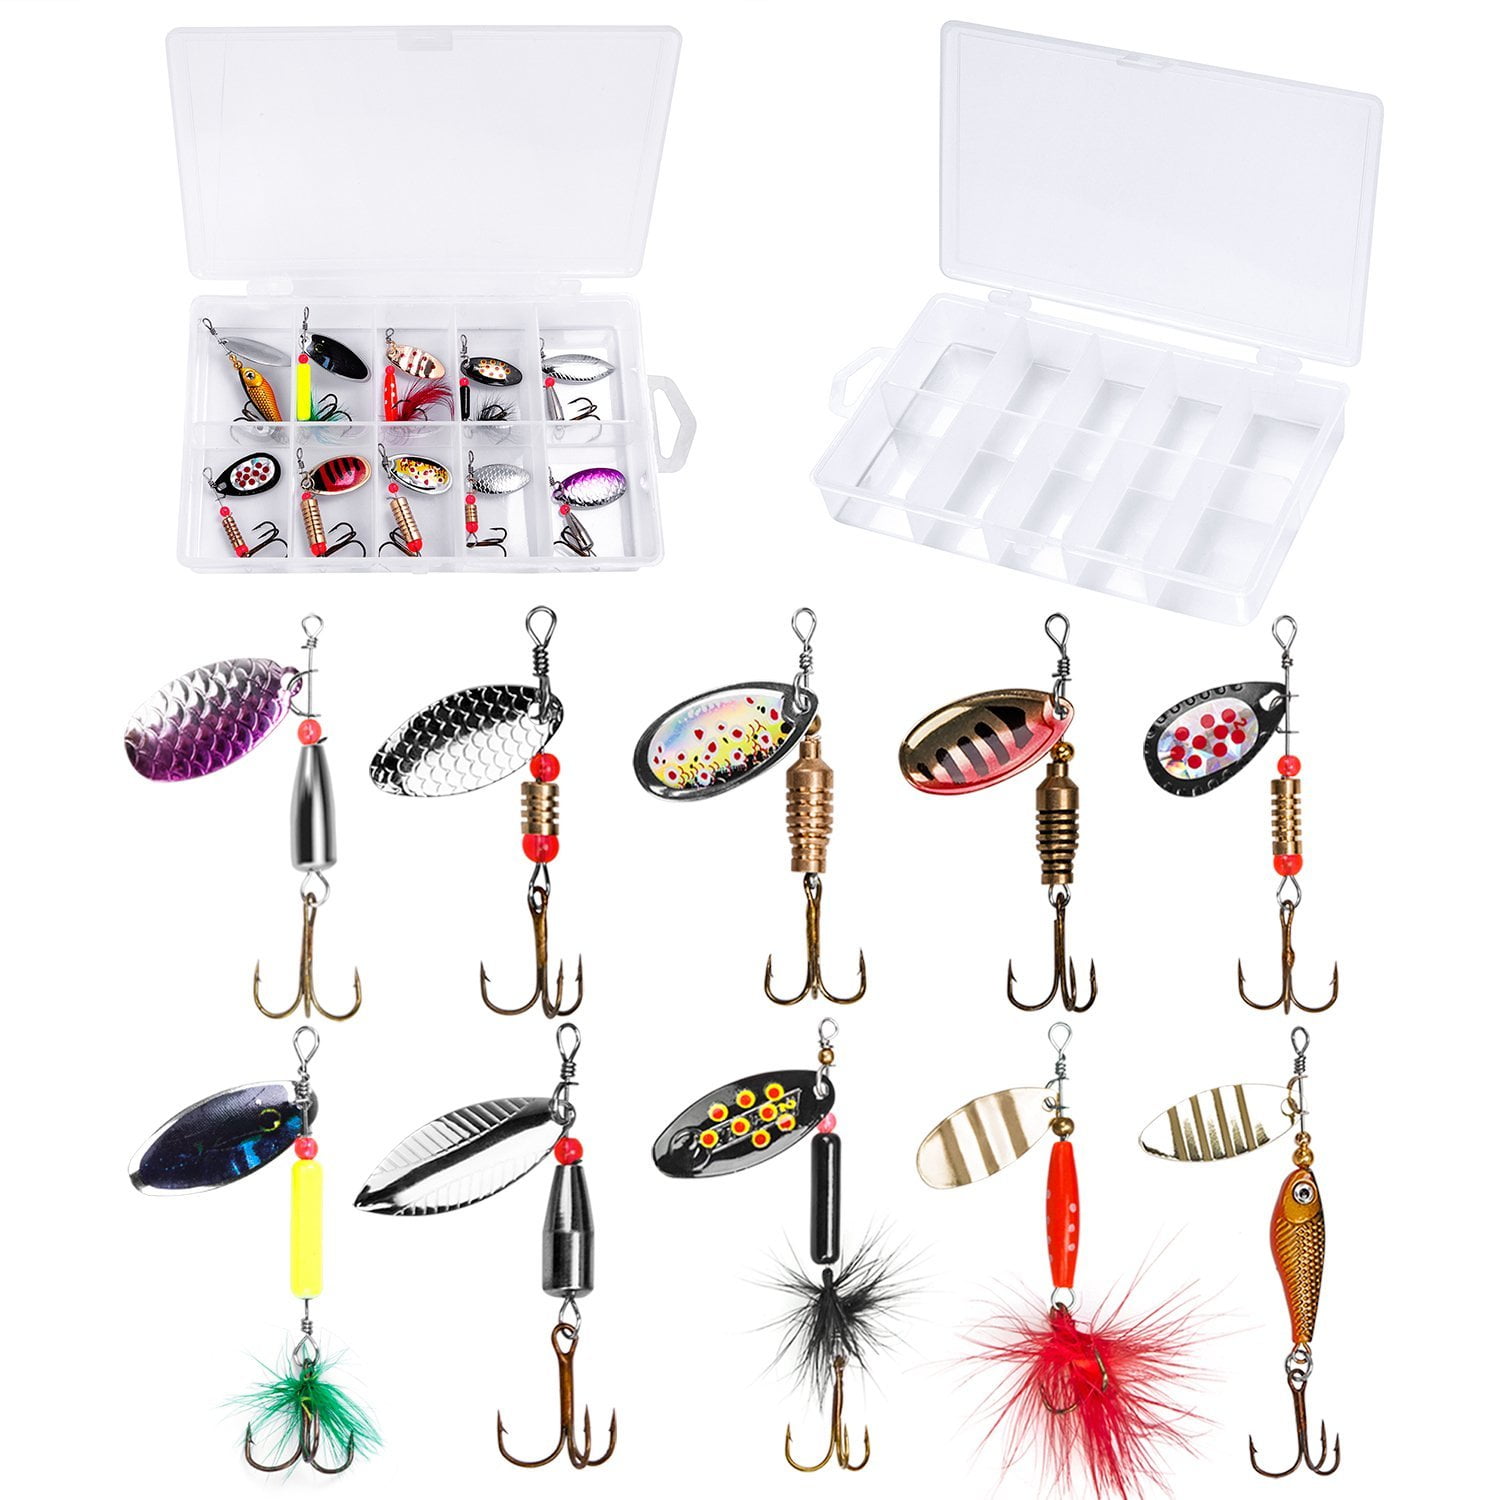 Soft Bait Lures Curly Tail Perch X4 Pike Lures Perch Baits Fishing Jig Head Shad